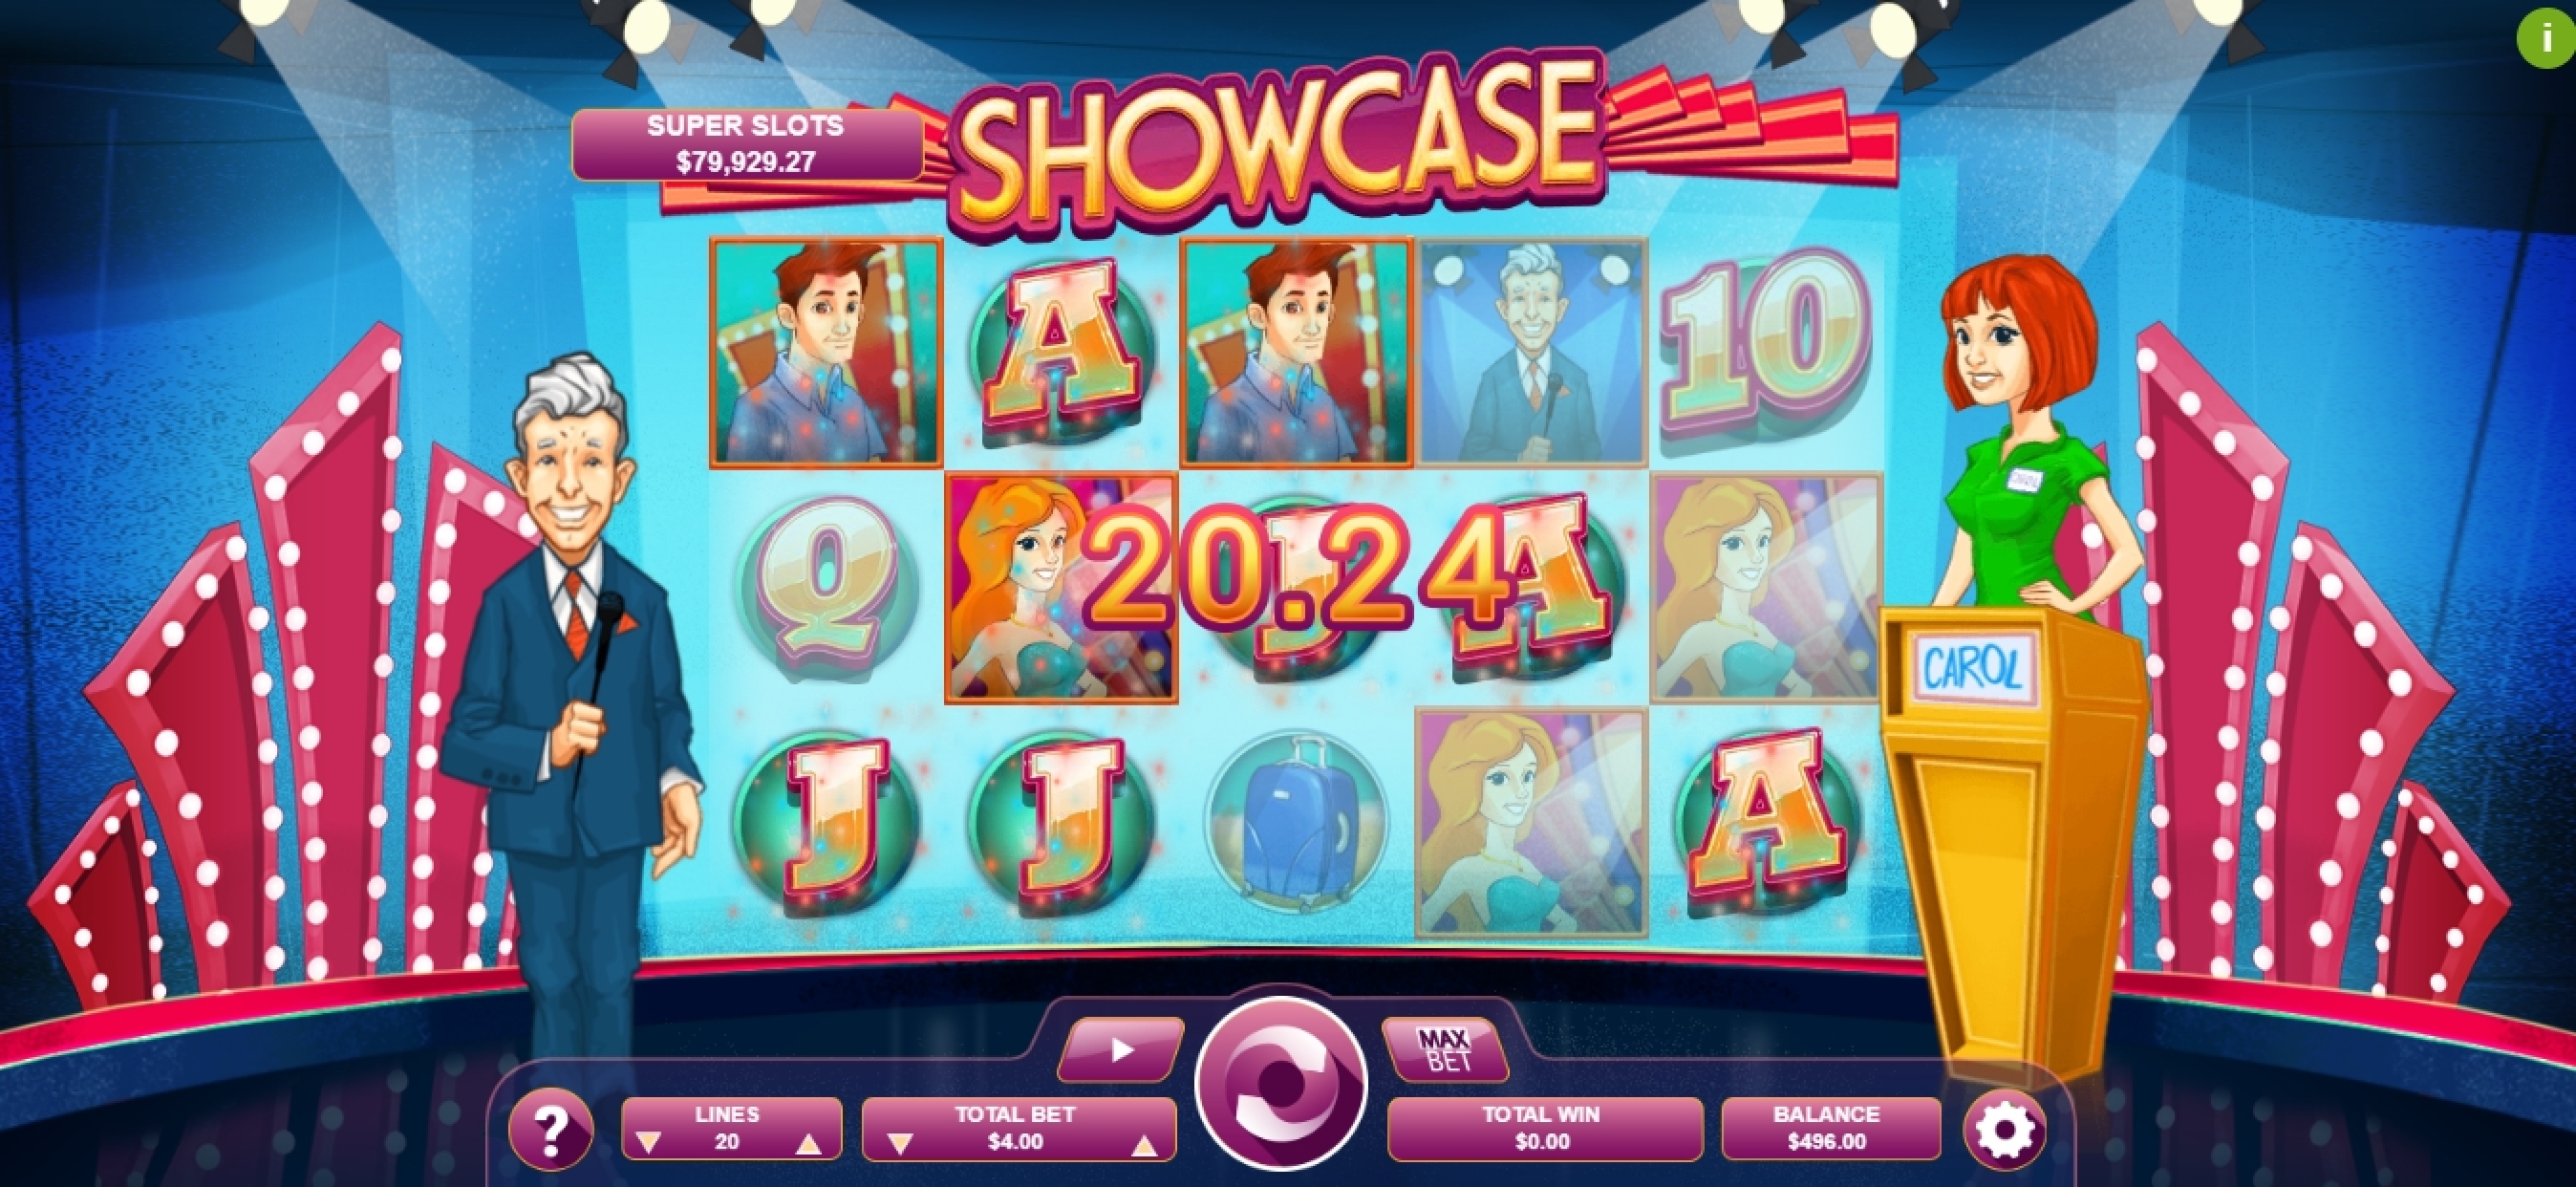 Win Money in Showcase Free Slot Game by Arrows Edge